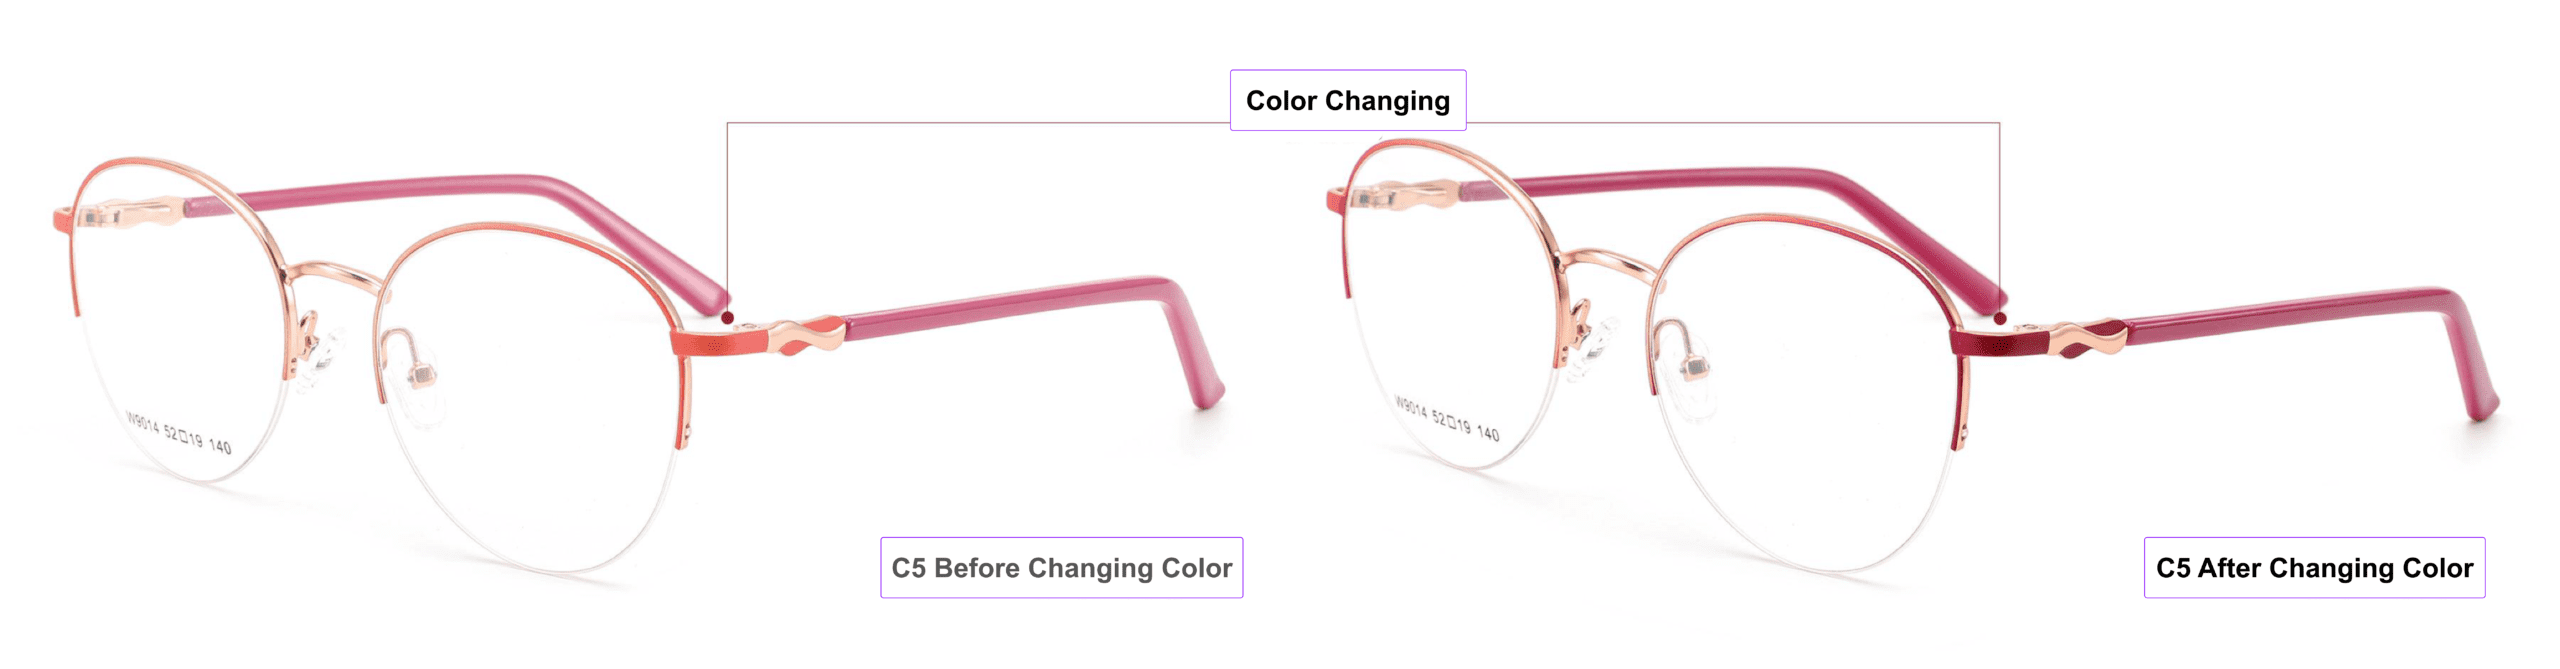 UV-activated Color Changing Glasses Frames, orange, pink gold, bright red, burgundy, process of color changing